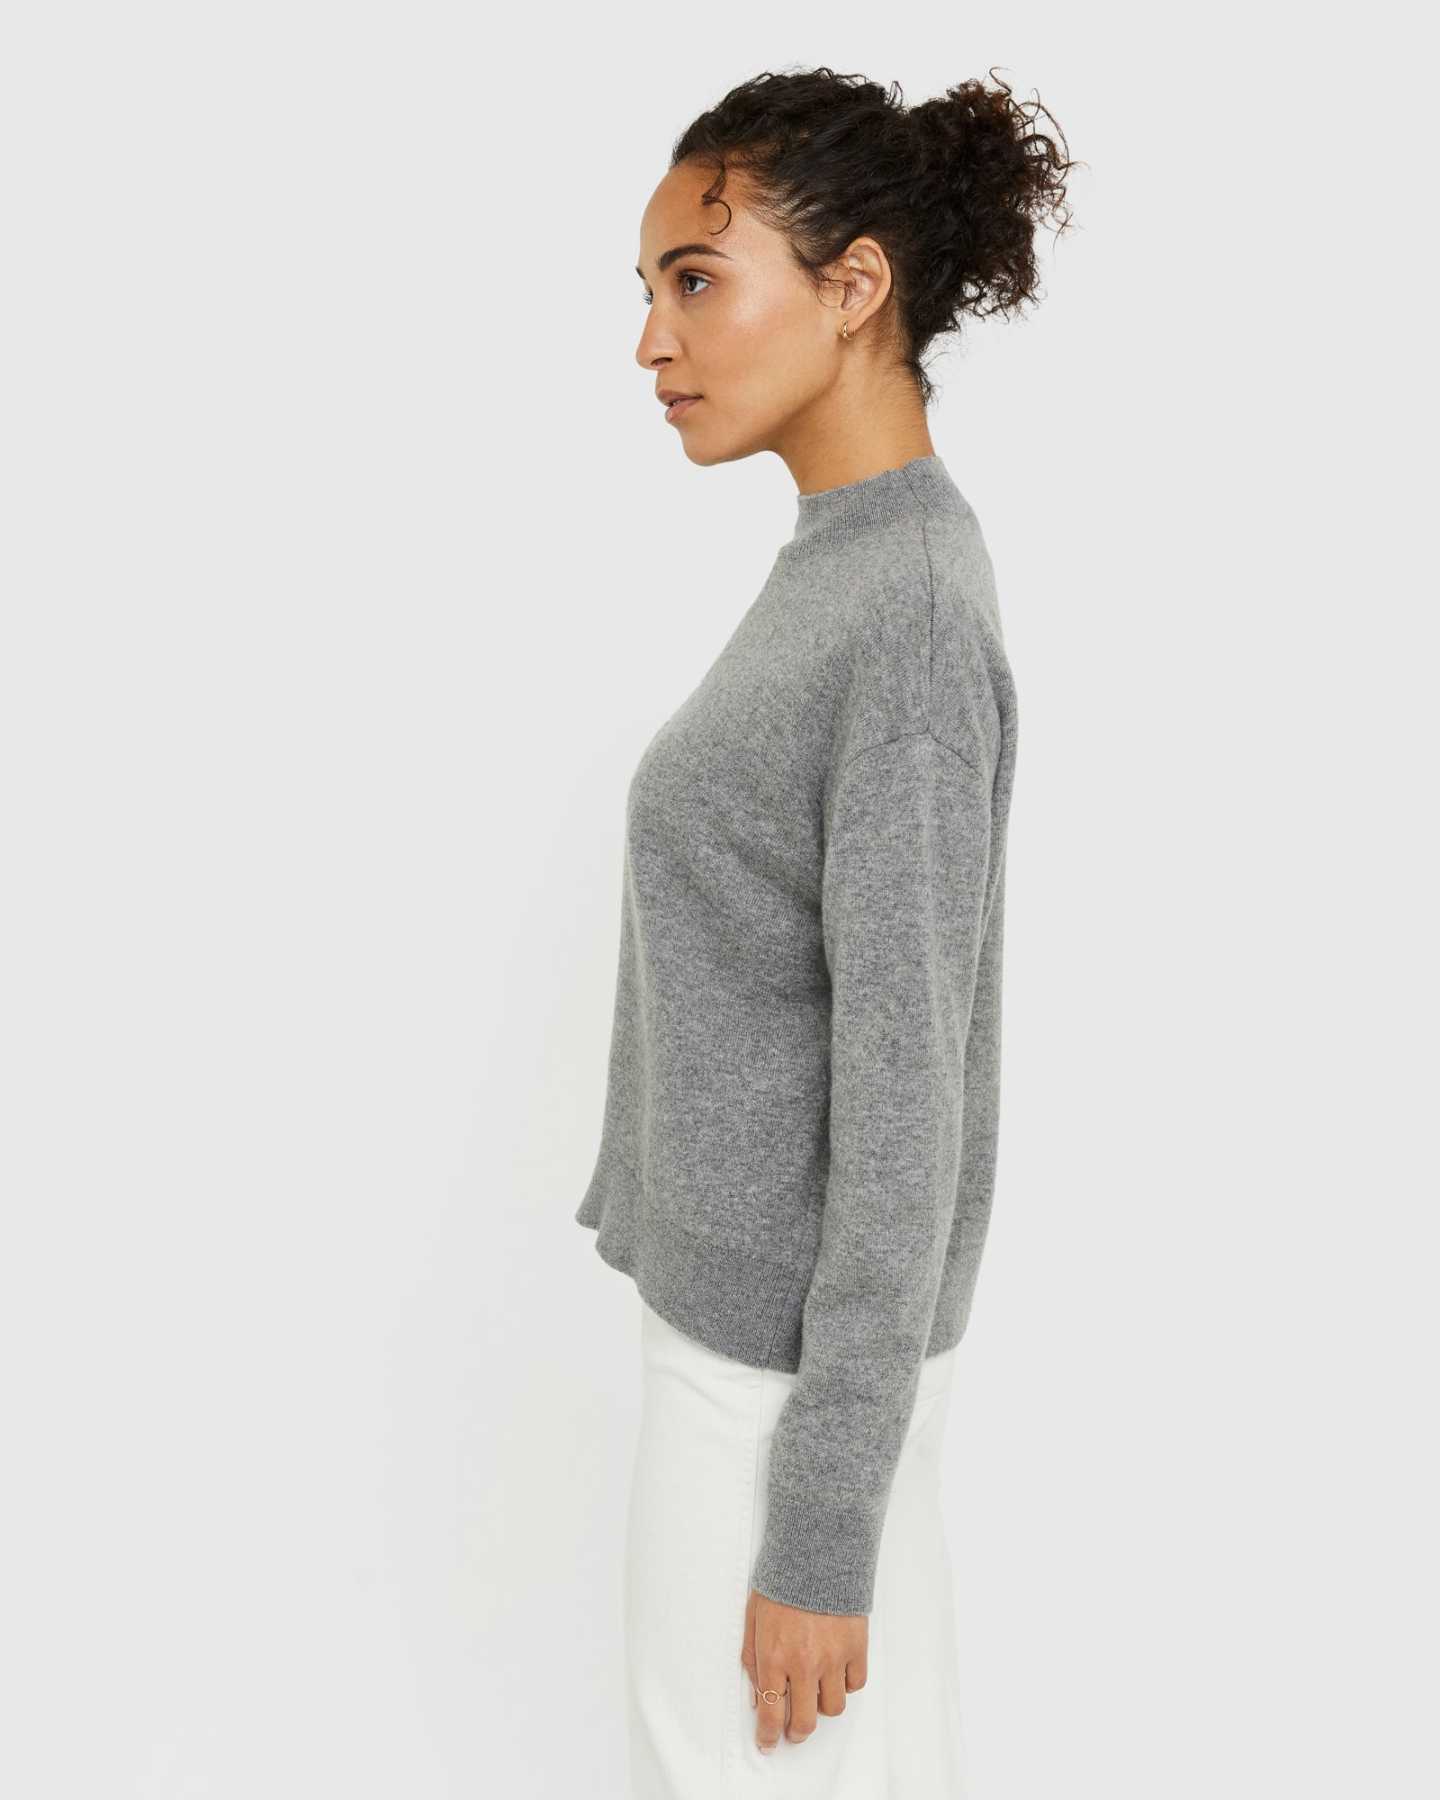 Lusso Cashmere Eileene Cashmere Crewneck Sweater Camel / Finished with ...